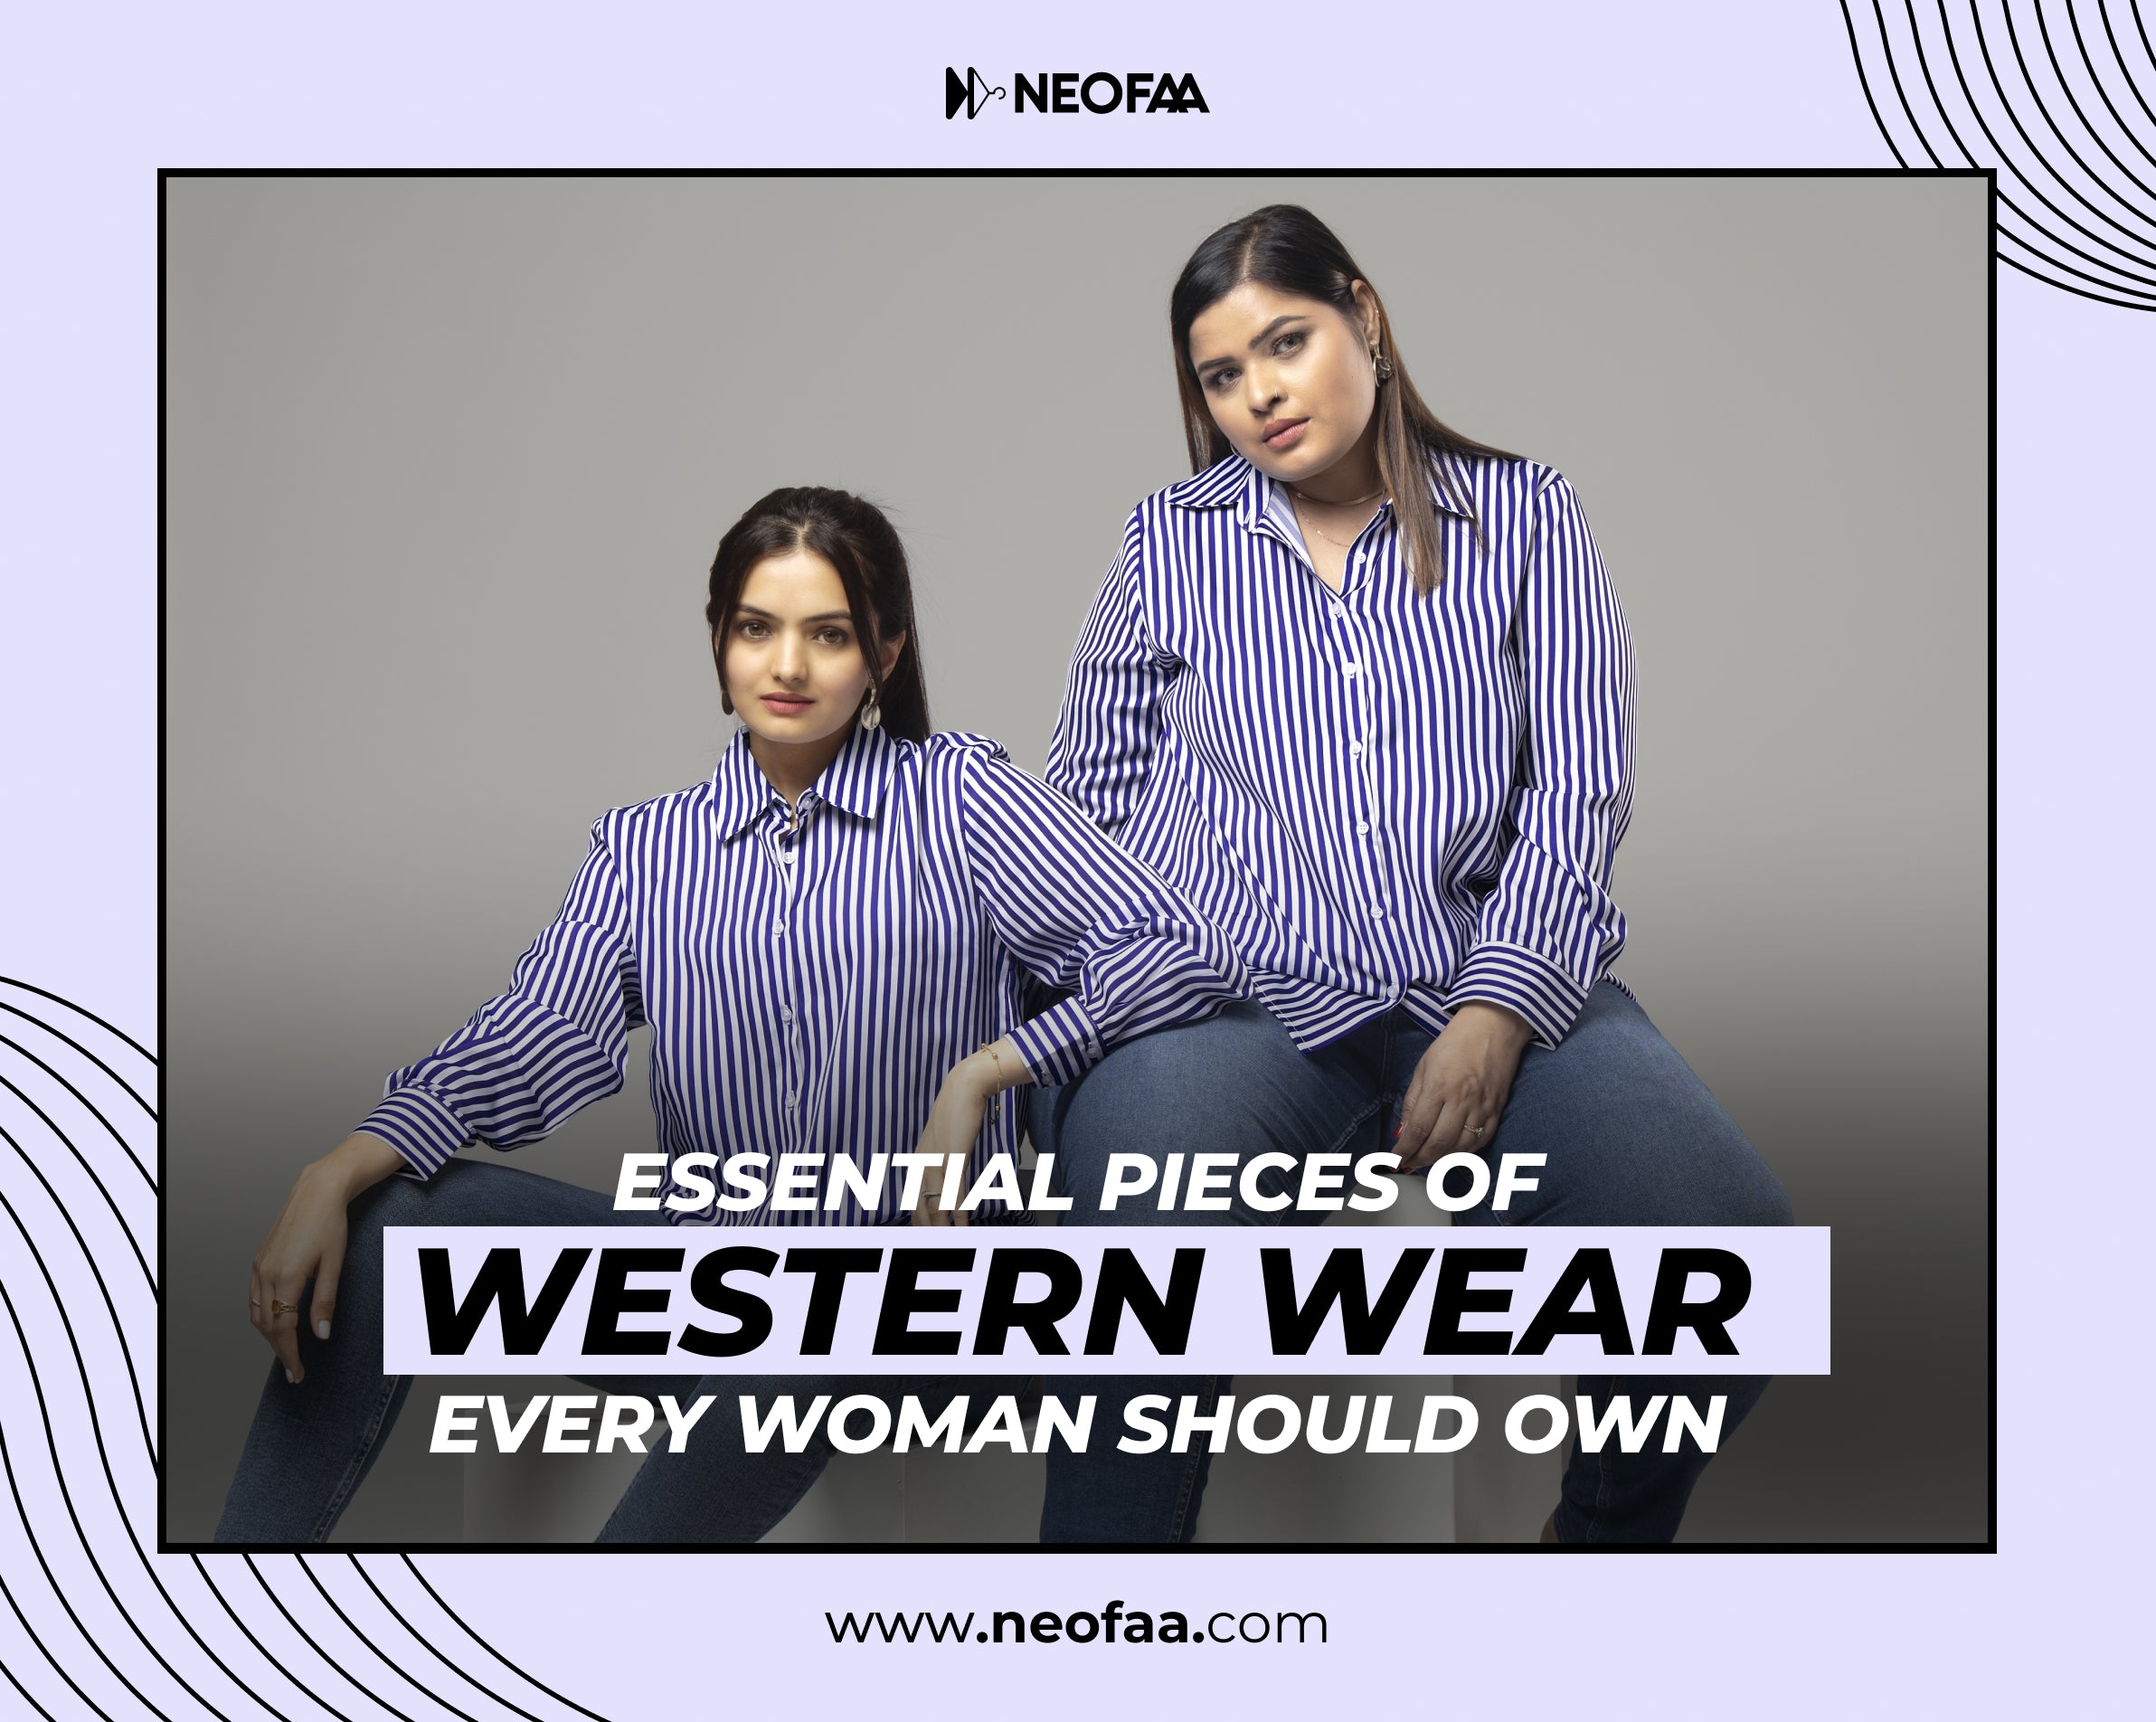 Essential Pieces of Western Wear Every Woman Should Own